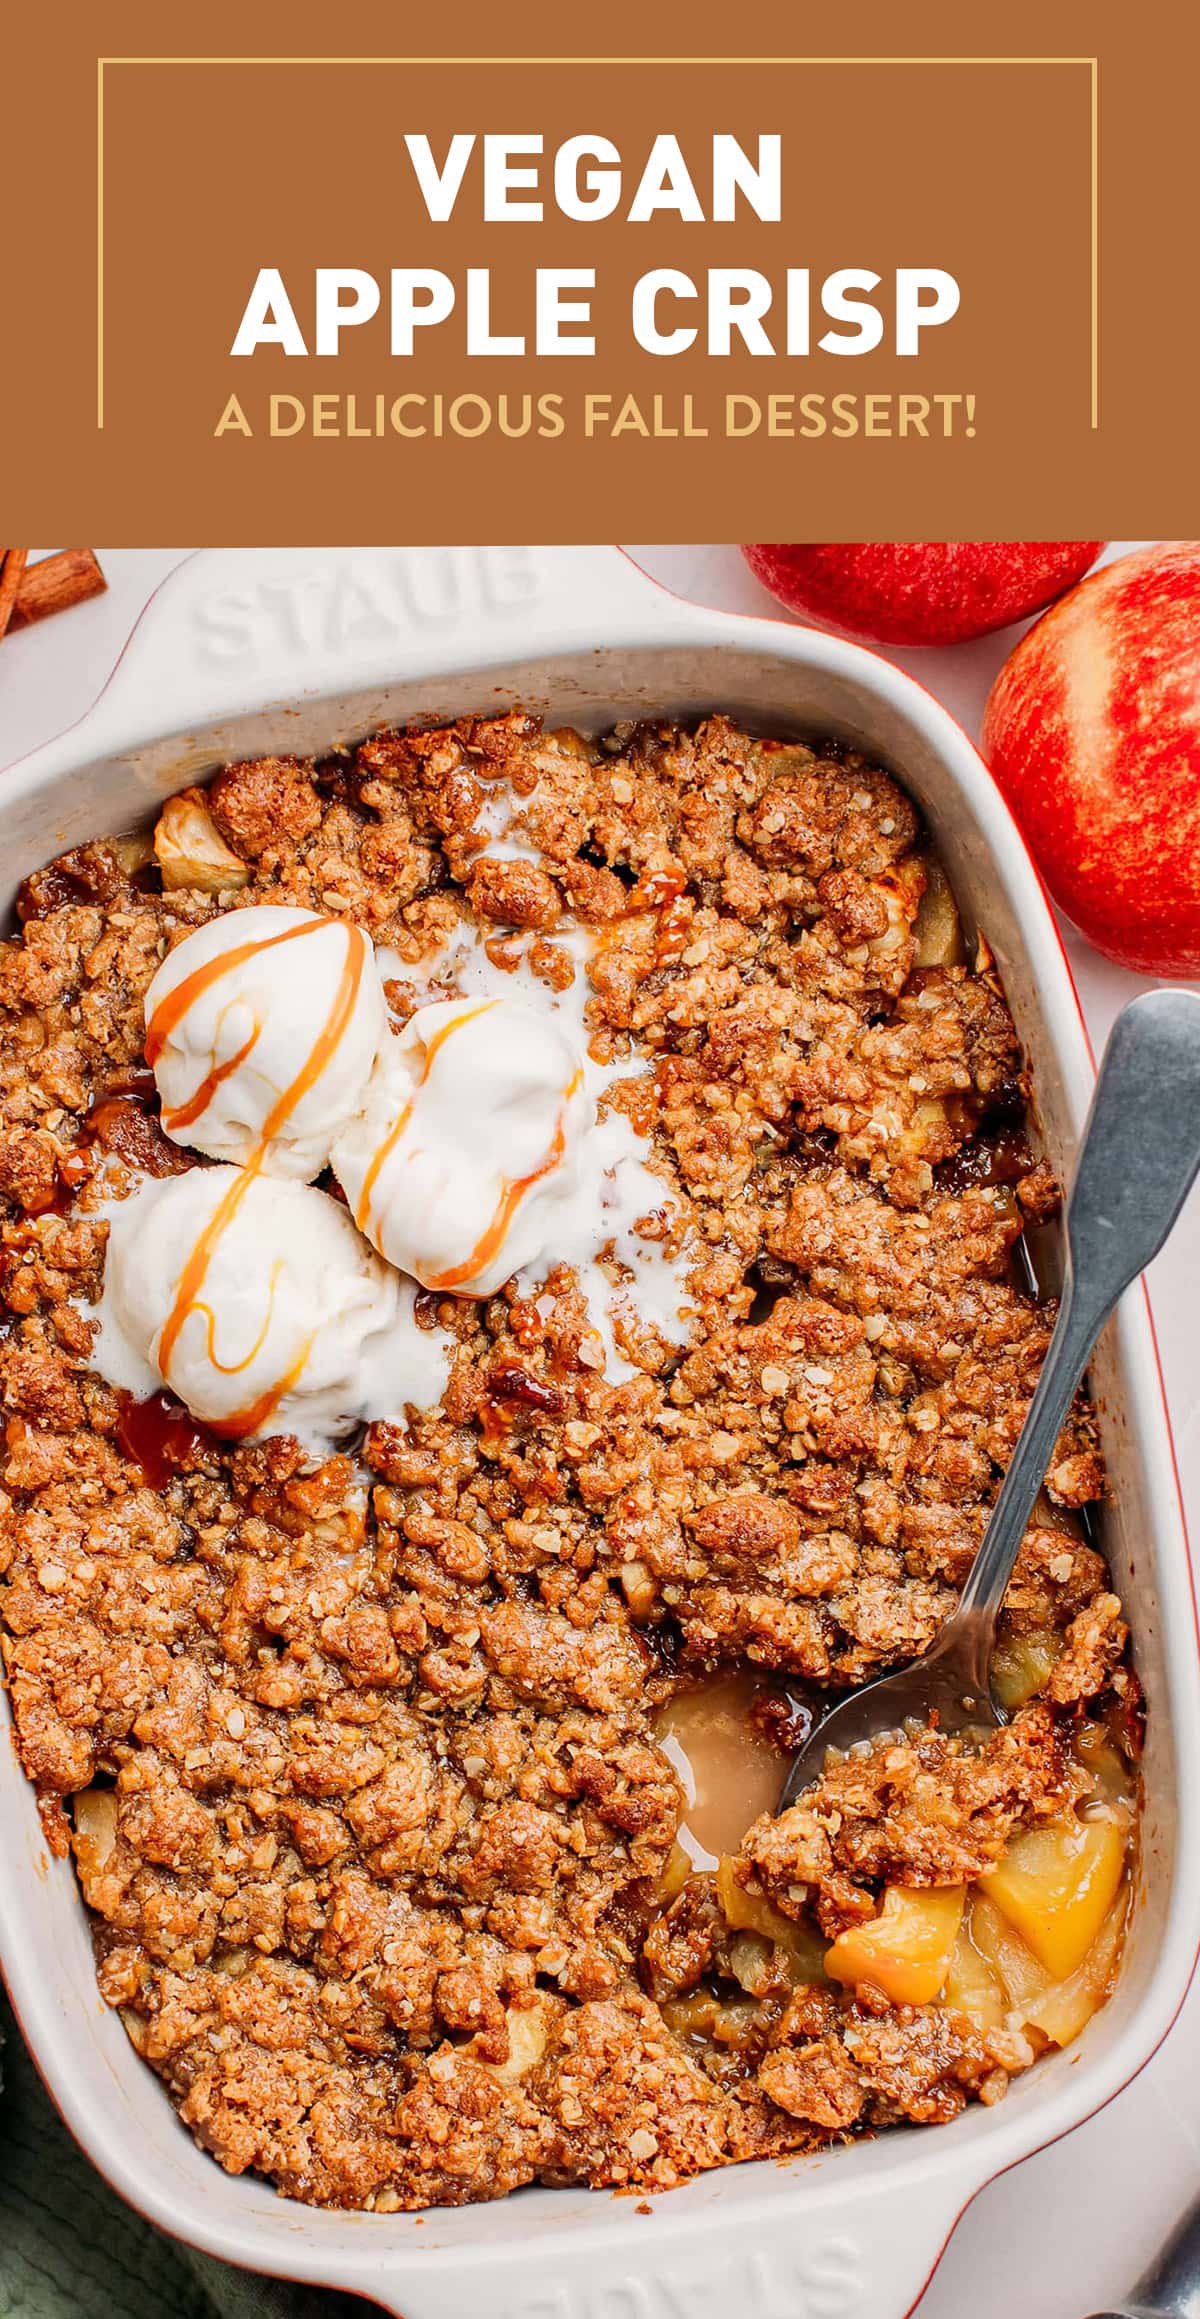 Make the best out of apple season with this incredible vegan apple crisp! Loaded with melty chunks of apples and topped with a crispy cinnamon-infused oatmeal topping, this simple yet delicious Fall dessert is sure to win your heart. #applecrisp #fall #vegan #baking